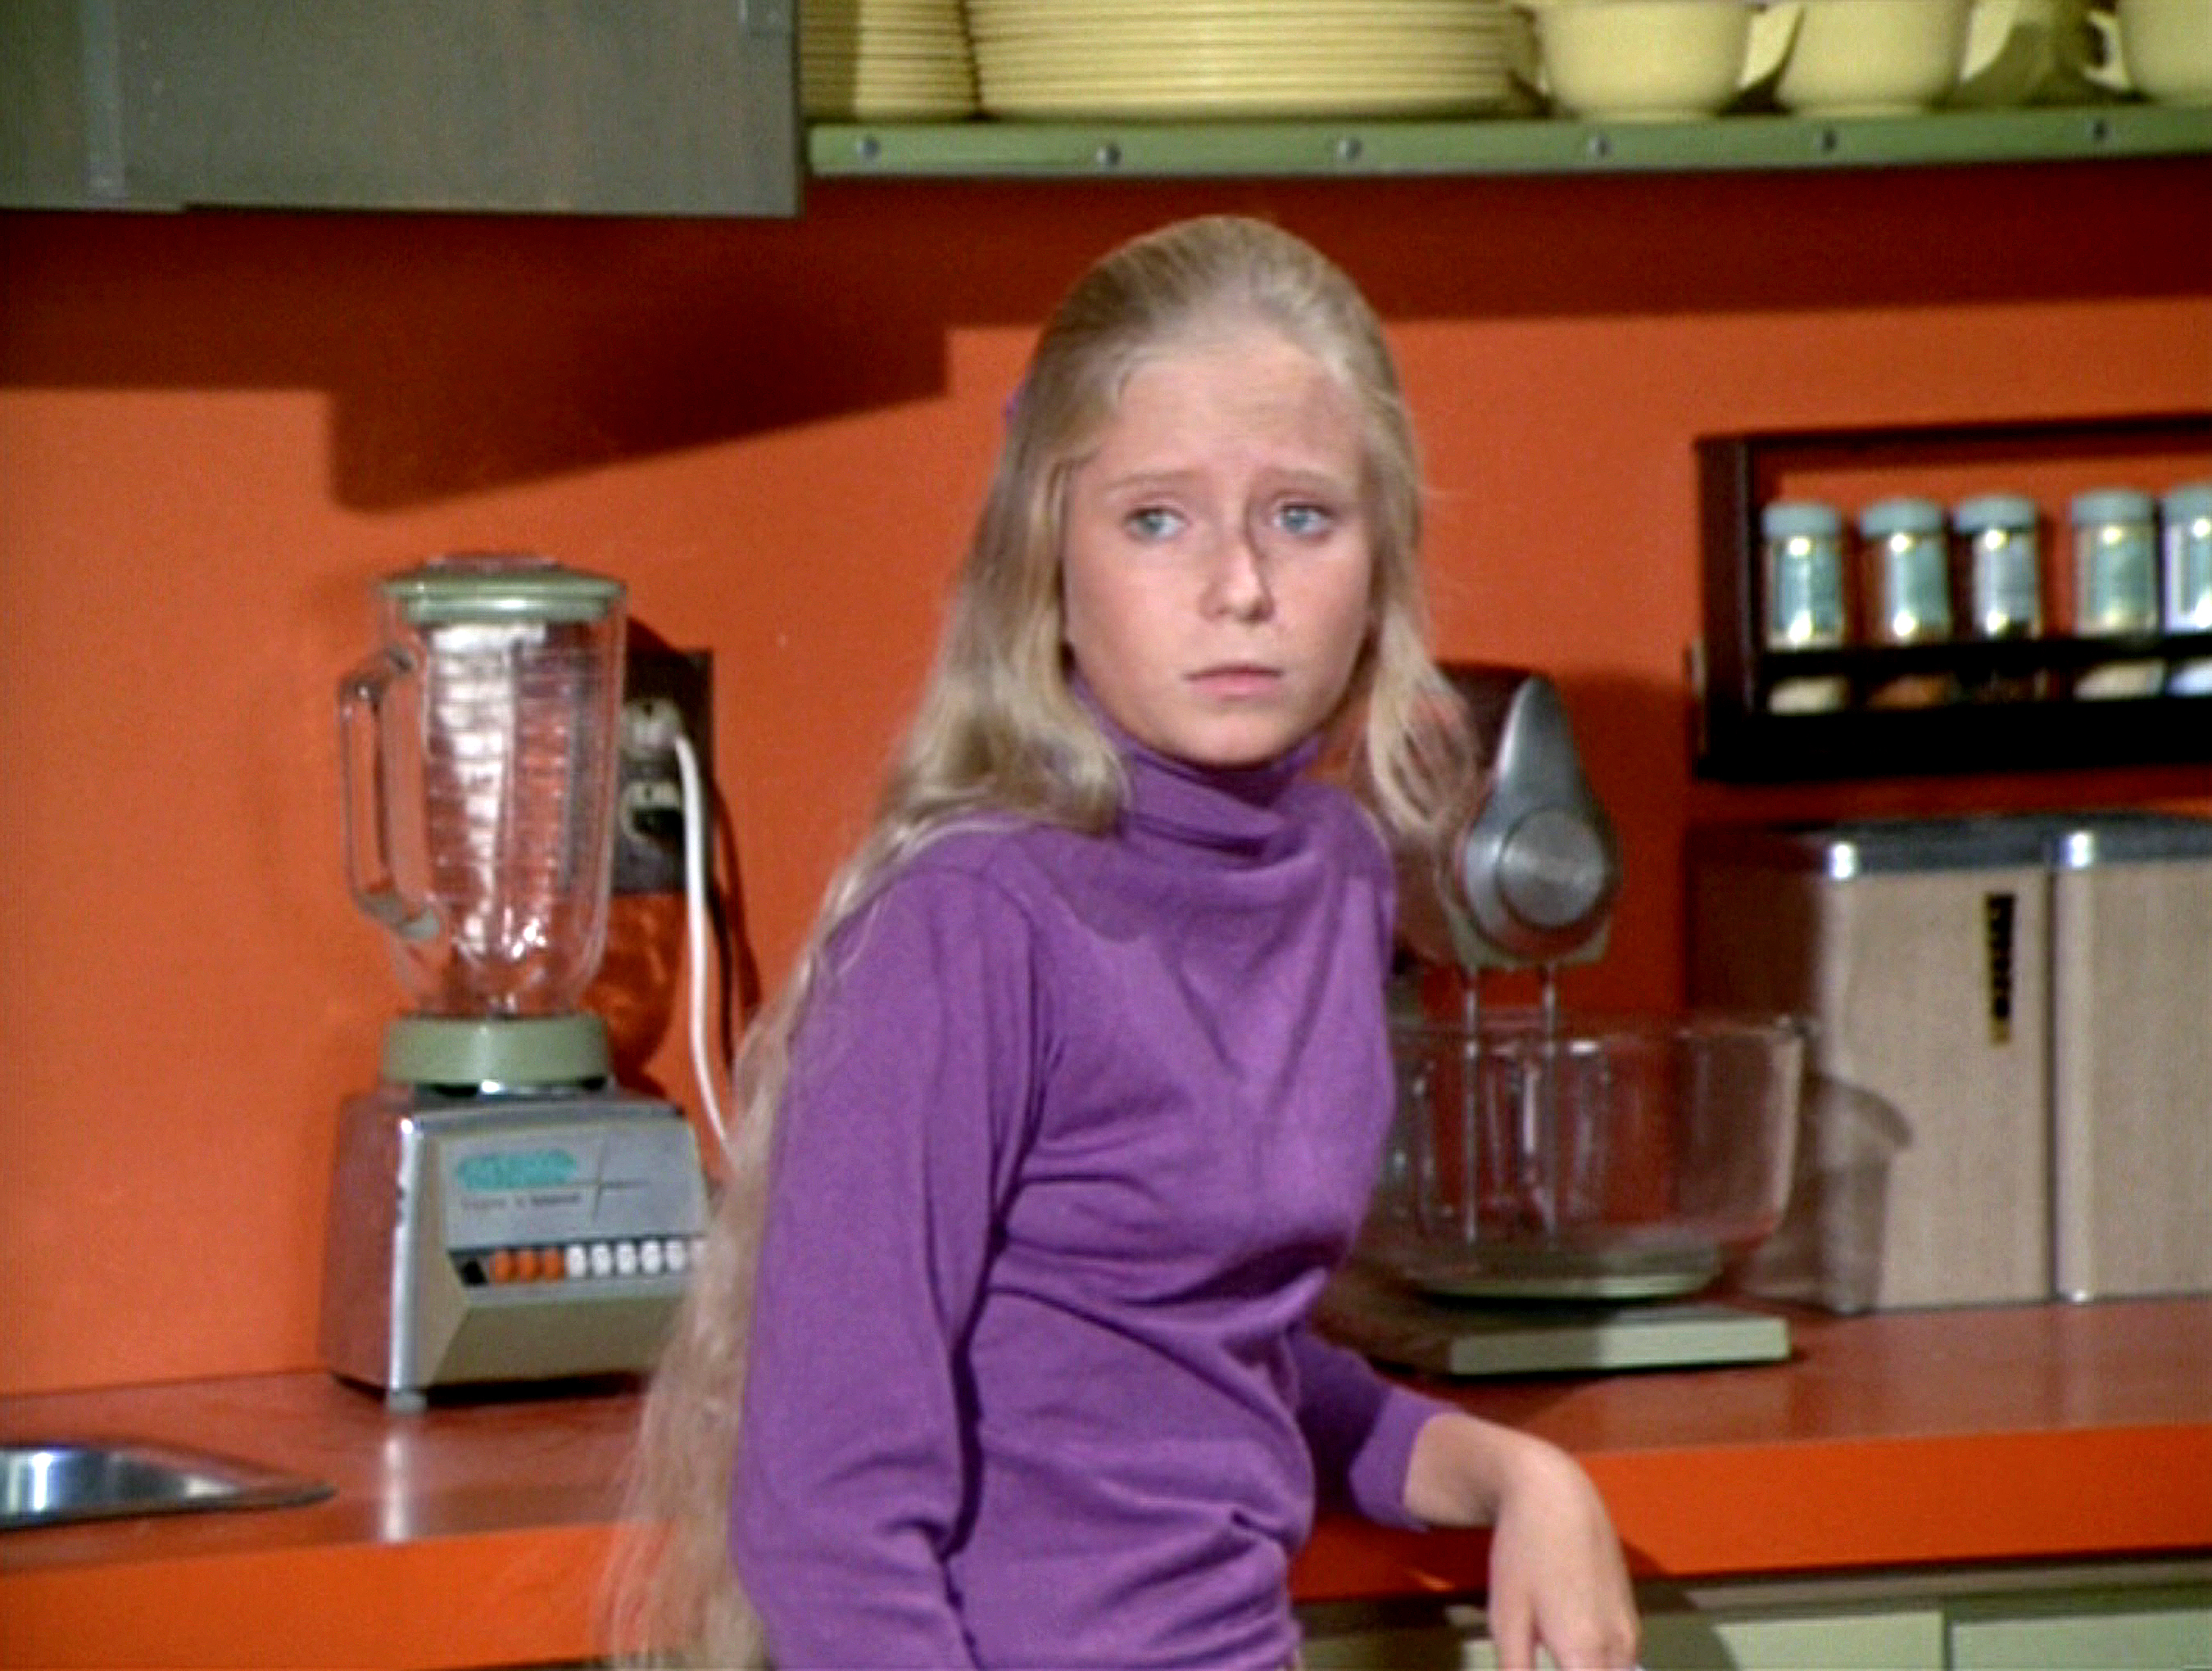 Eve Plumb on "The Brady Bunch" in 1972 | Source: Getty Images